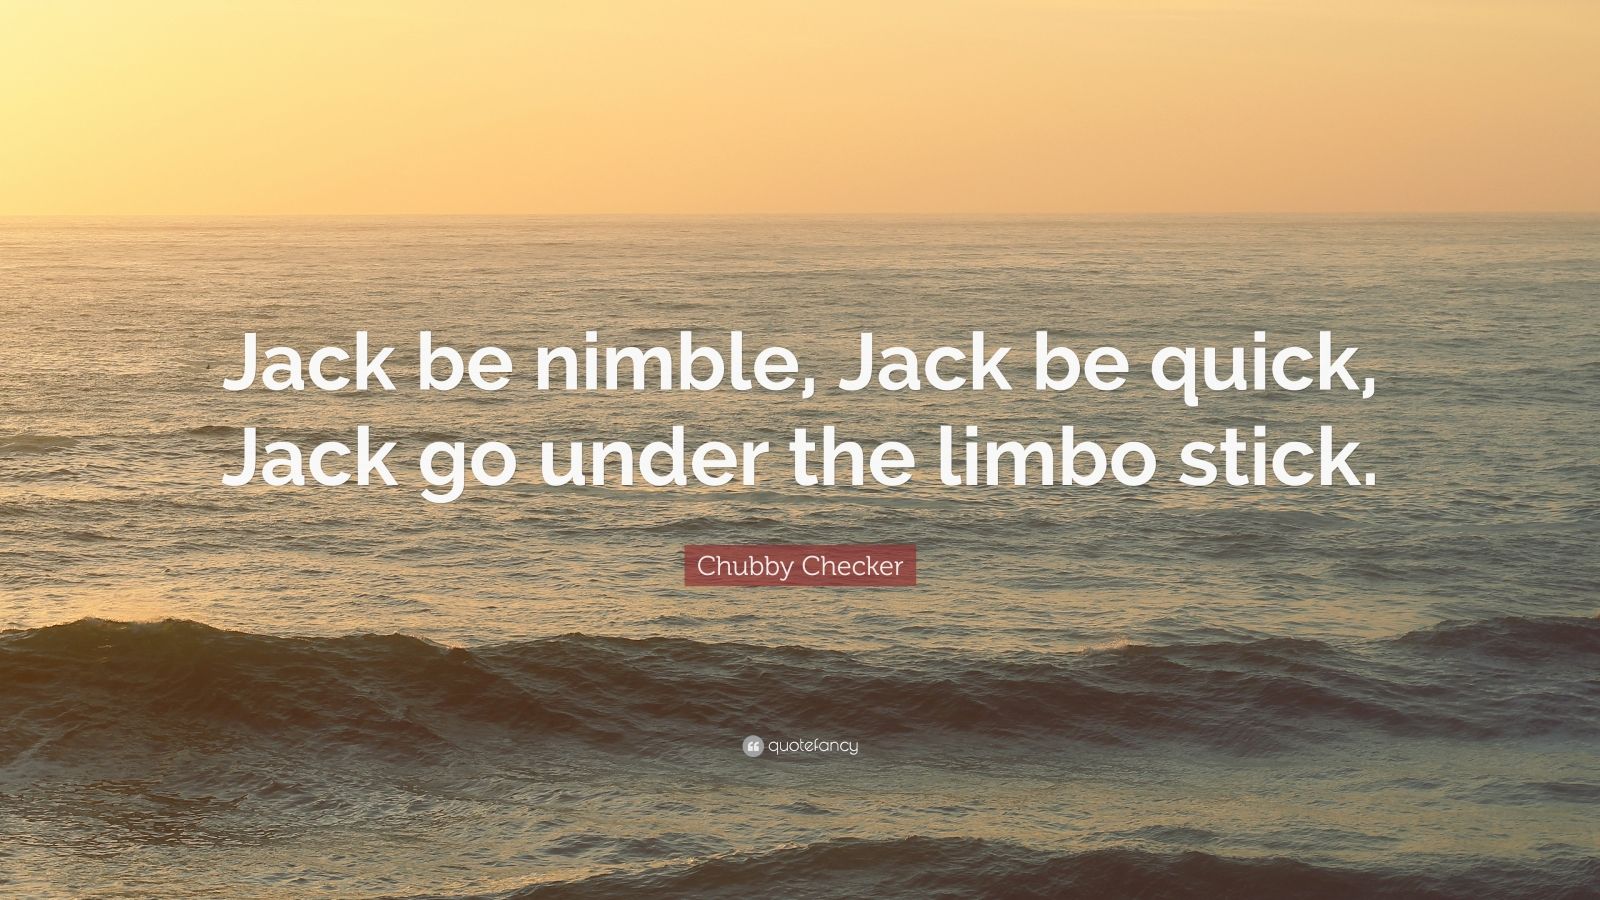 meaning jack be nimble jack be quick